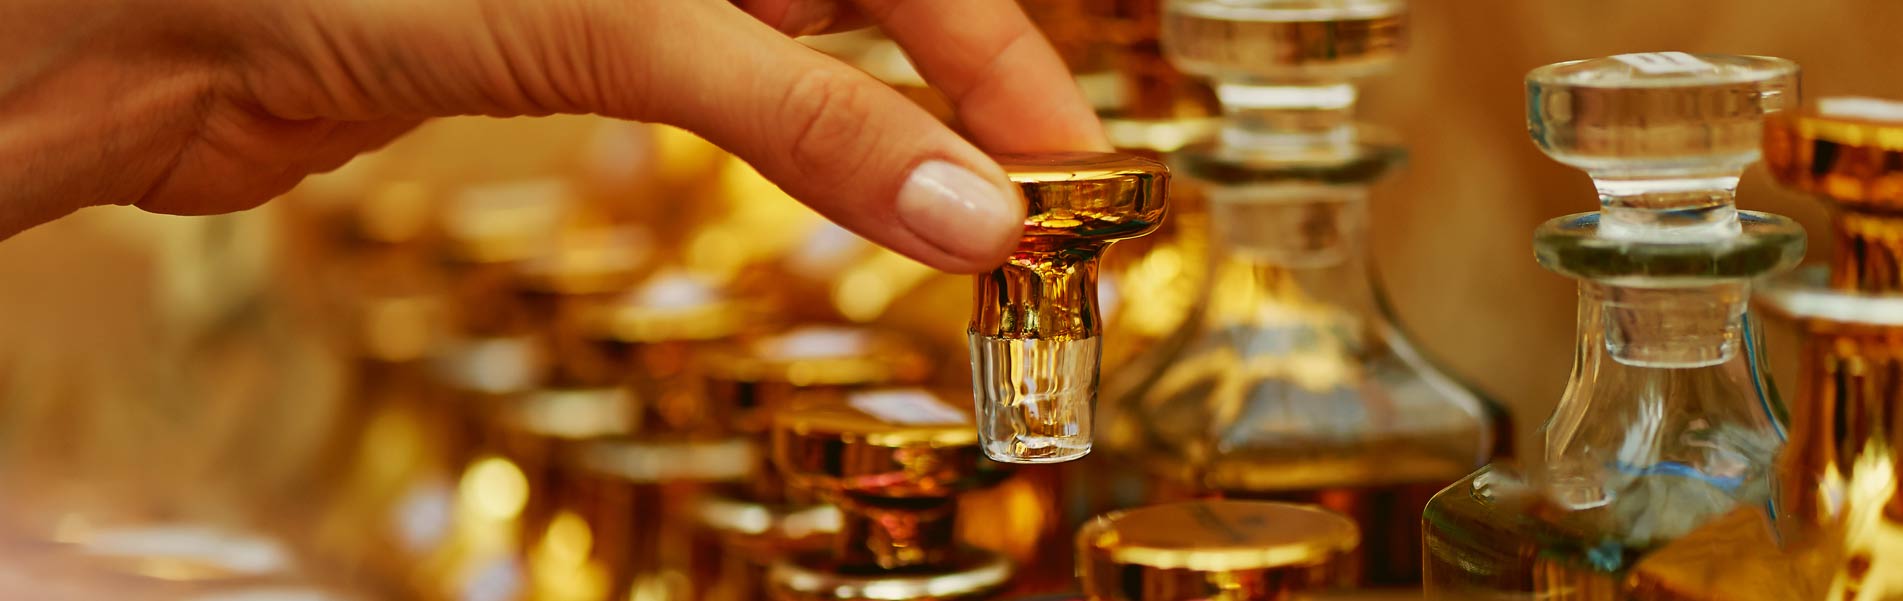 Perfume Making - Level One Course